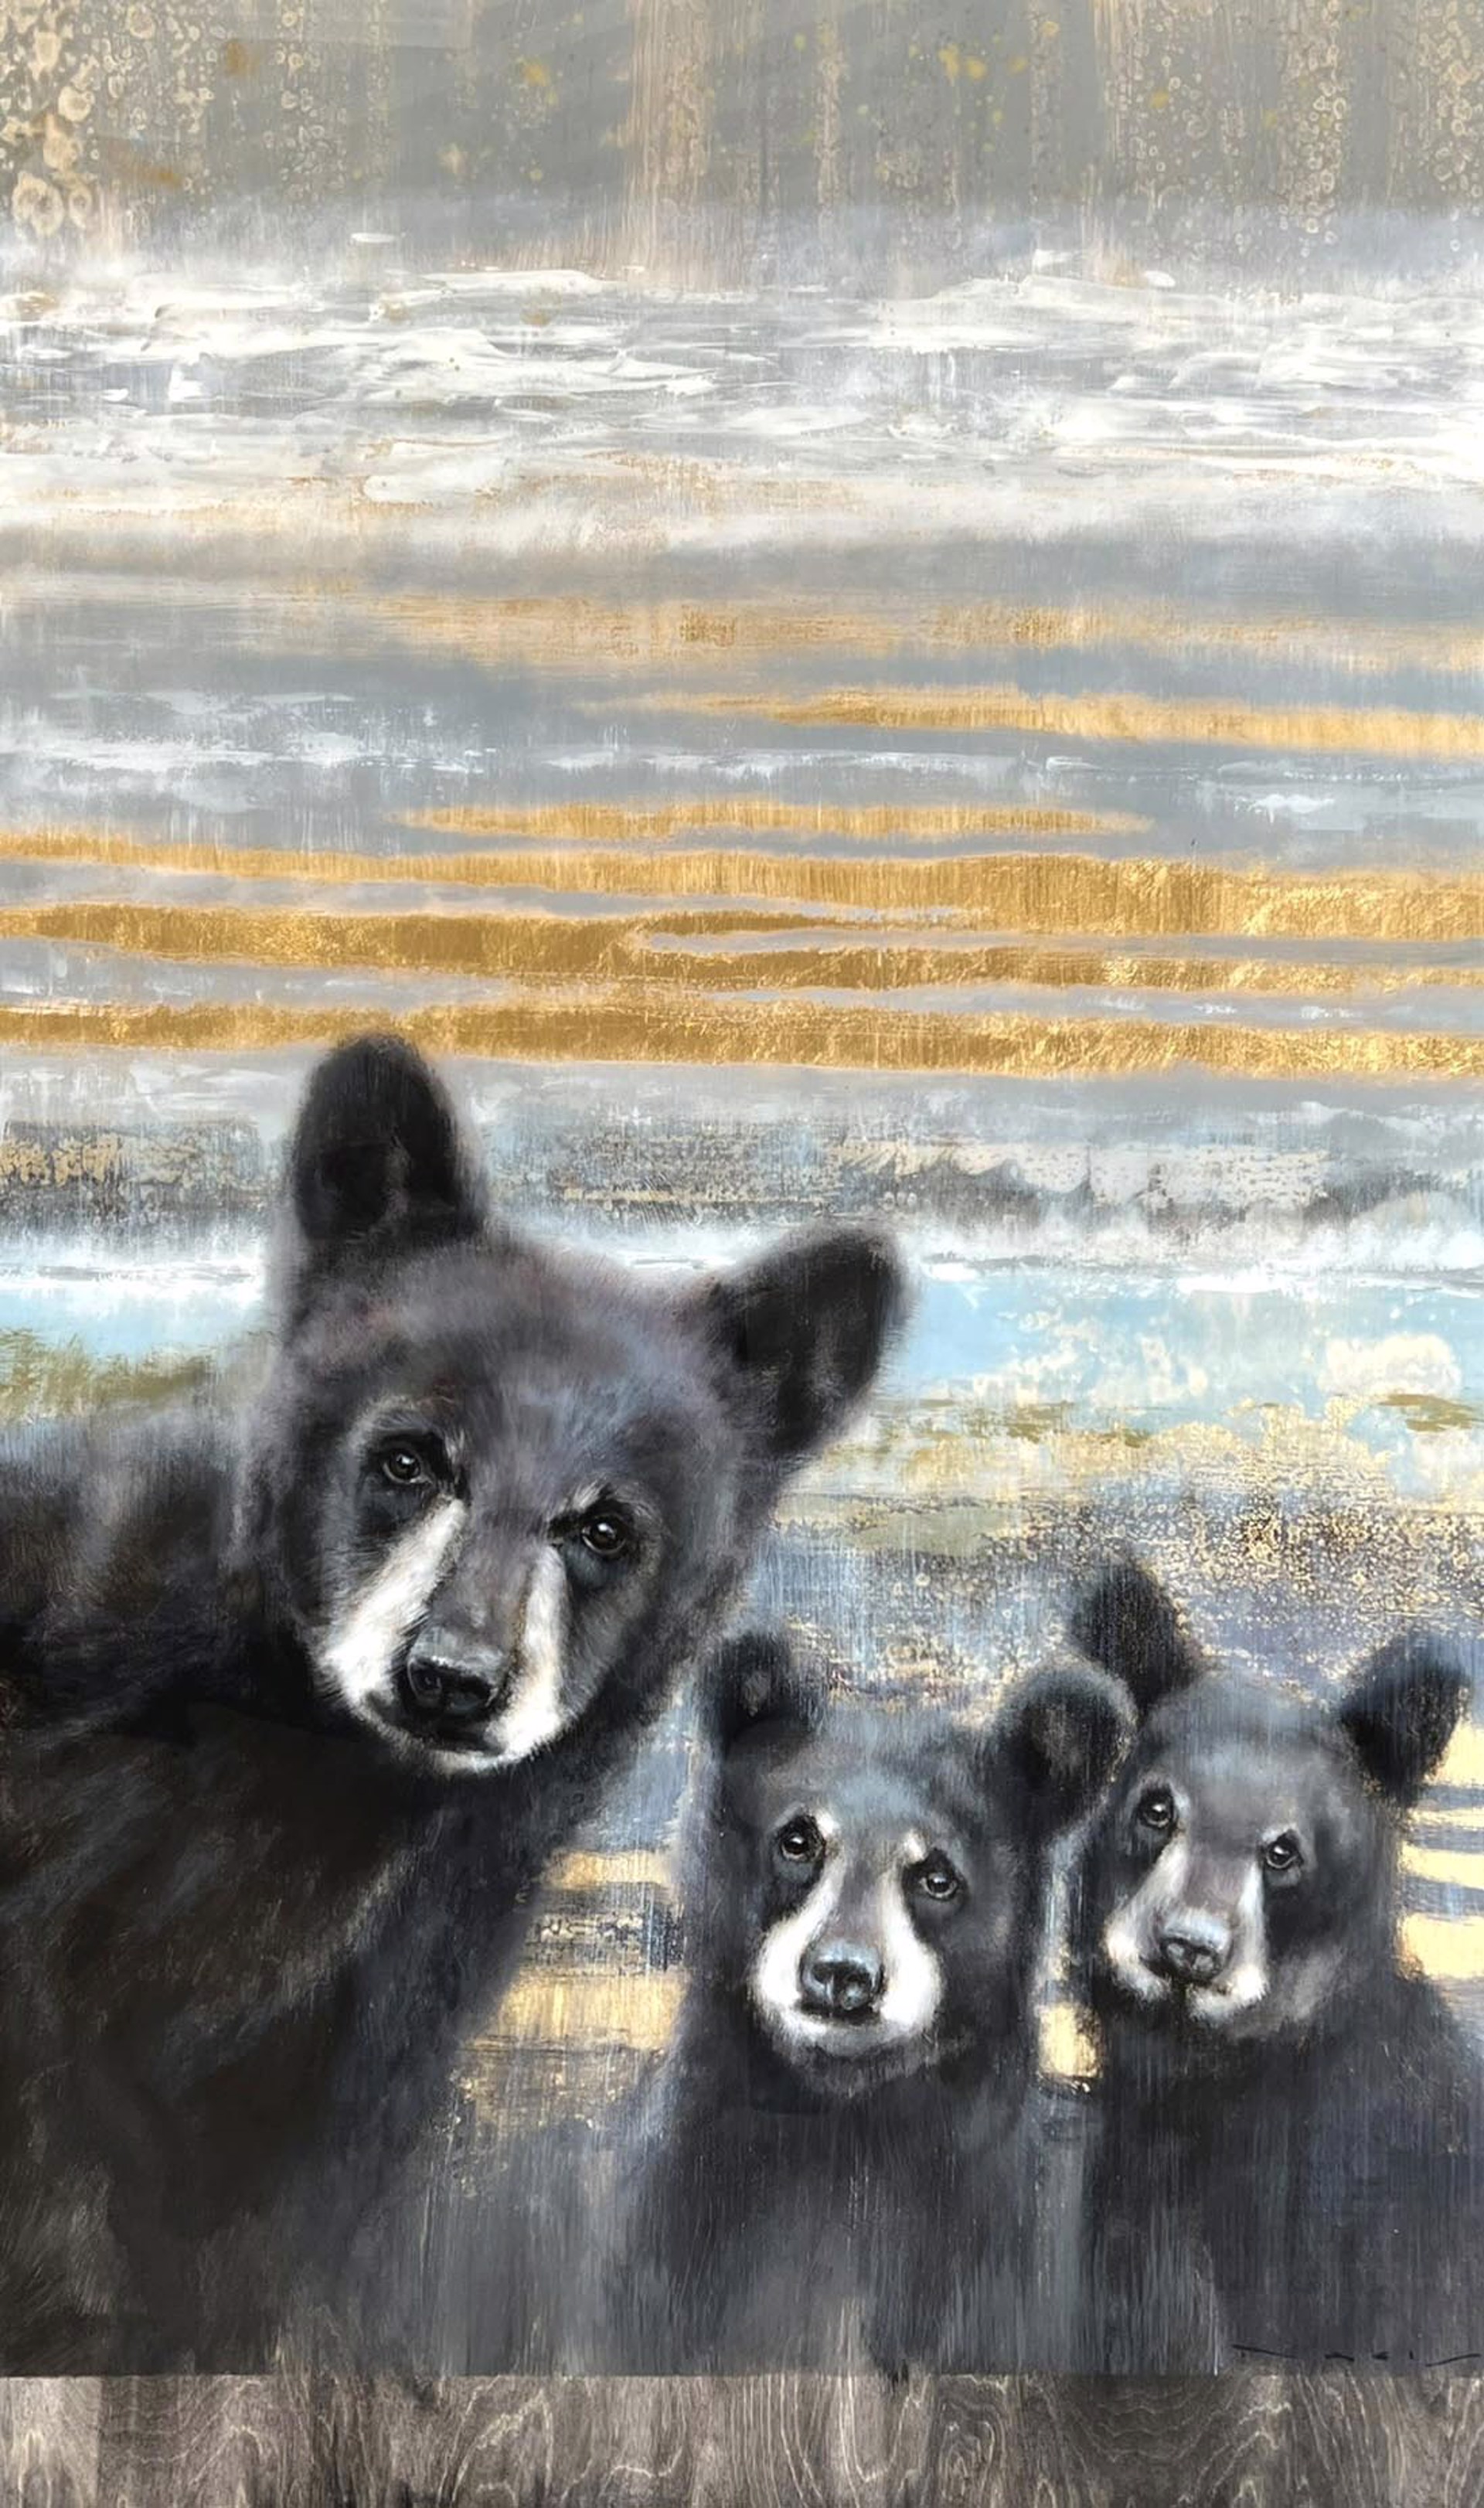 Original Acrylic Painting Of Three Black Bear Cubs Over Abstracted Sky Background With Gold Detail